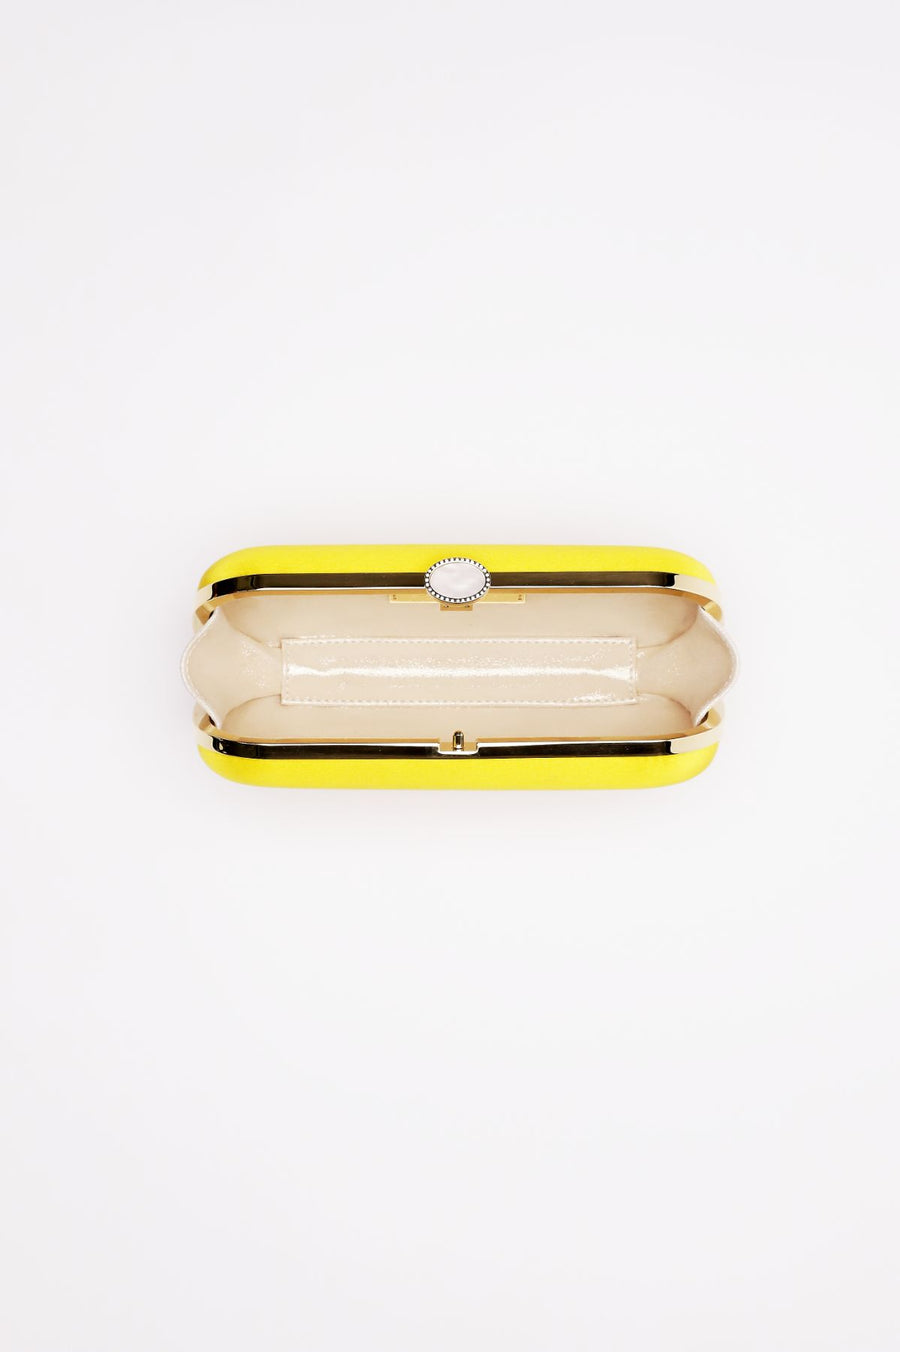 Top open view of Bella Clutch in Limoncello yellow satin with gold hardware frame.